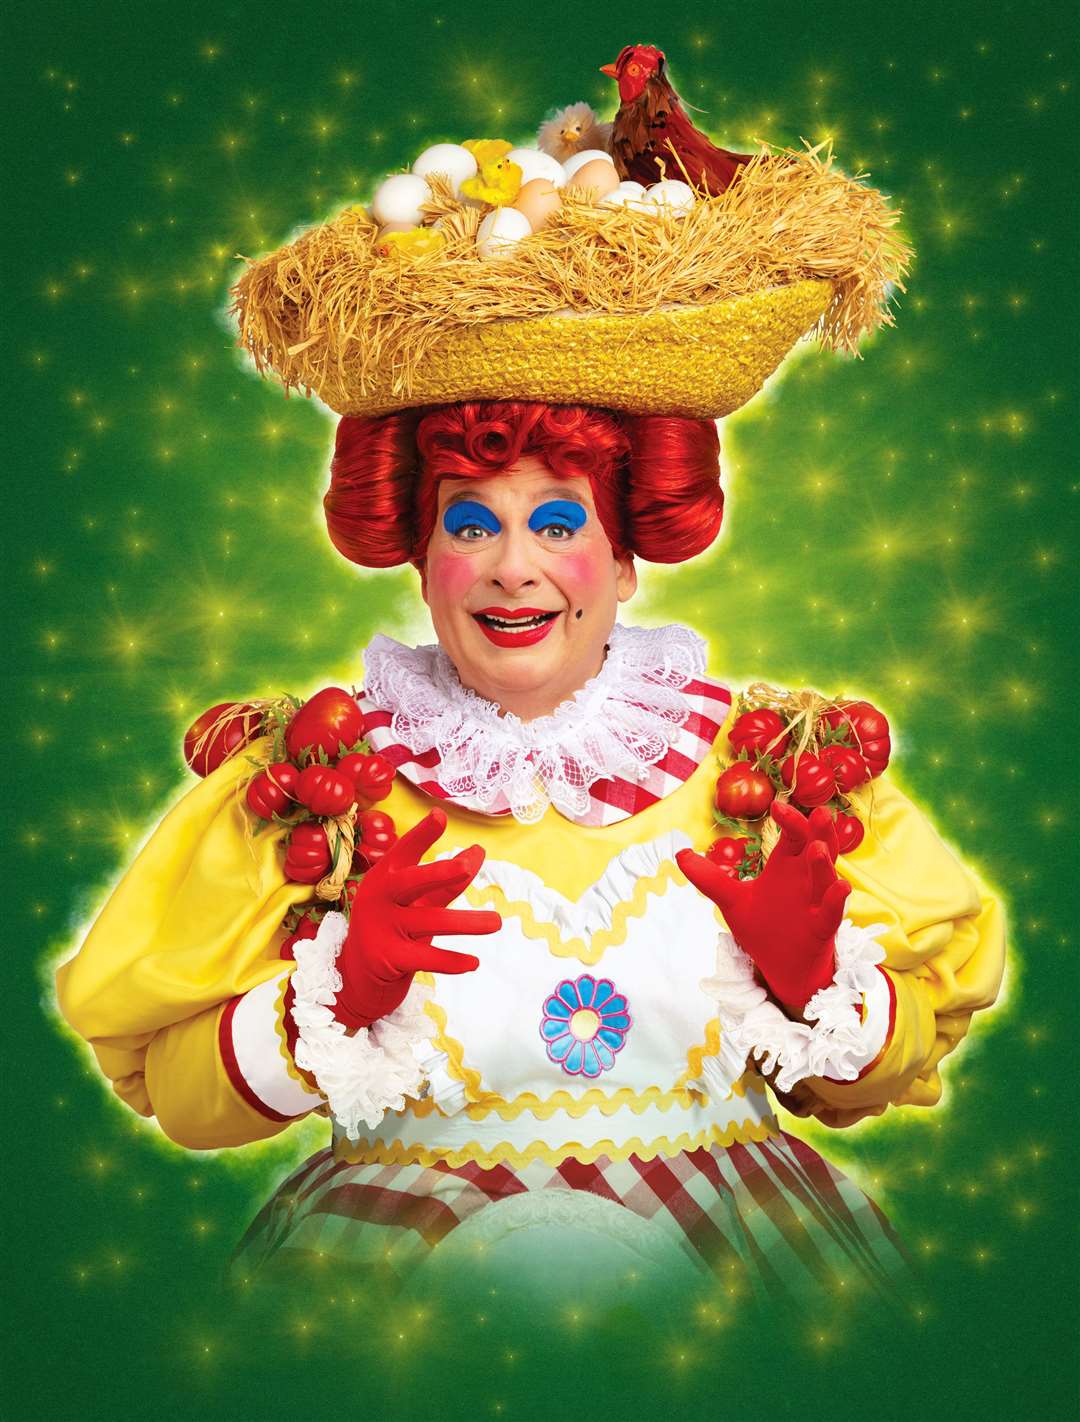 Christopher Biggins is due to star in this year's pantomime at the Dartford Orchard Theatre.